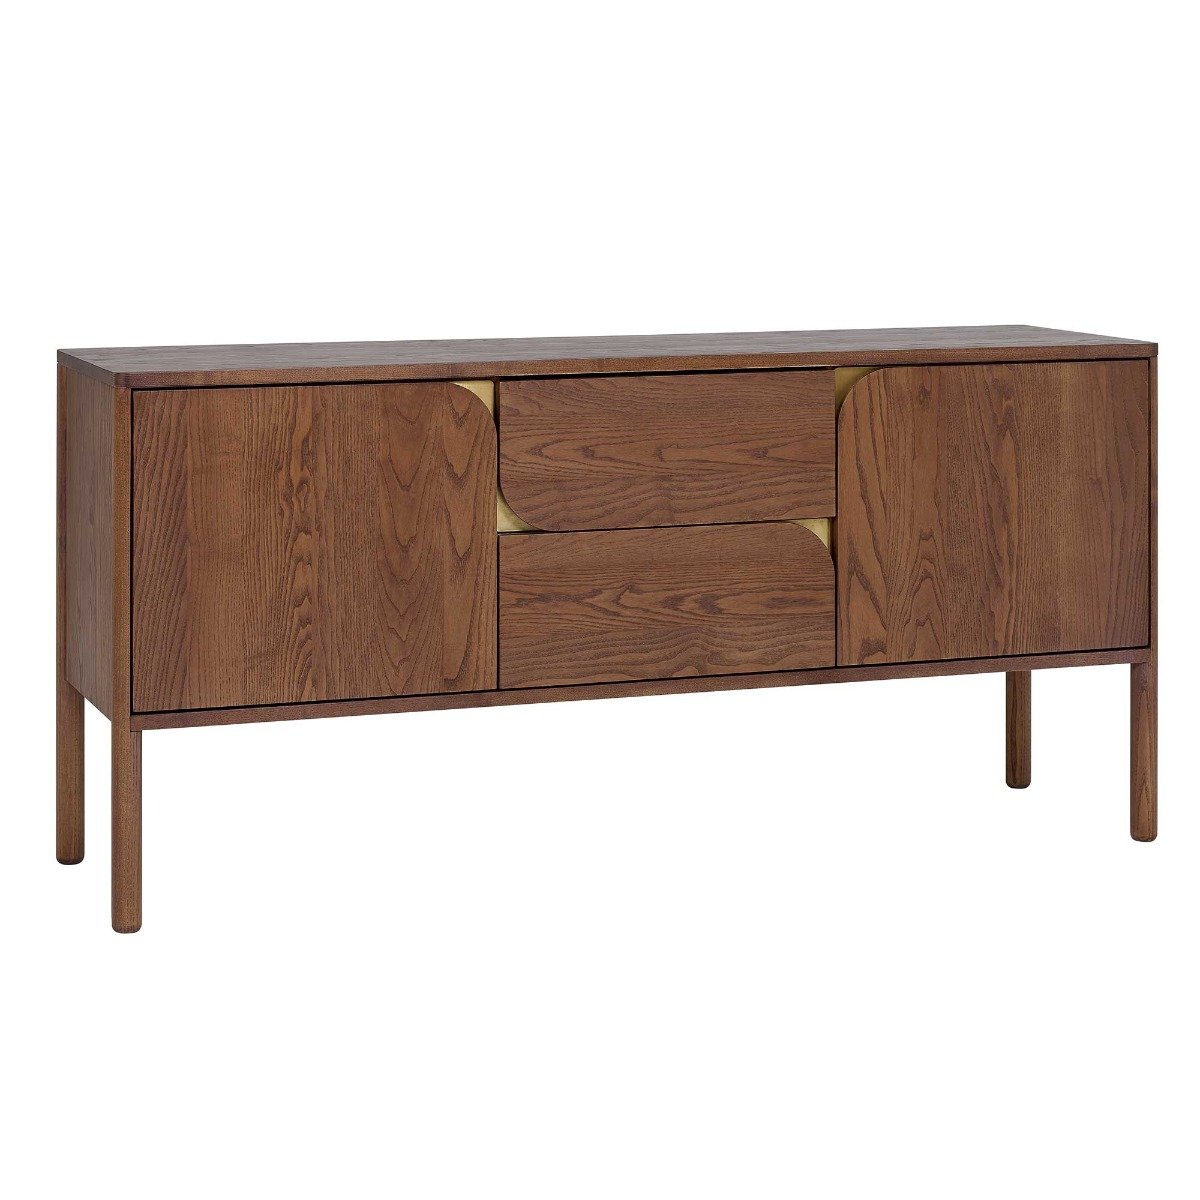 Ercol Verso Large Sideboard, Brown | Barker & Stonehouse